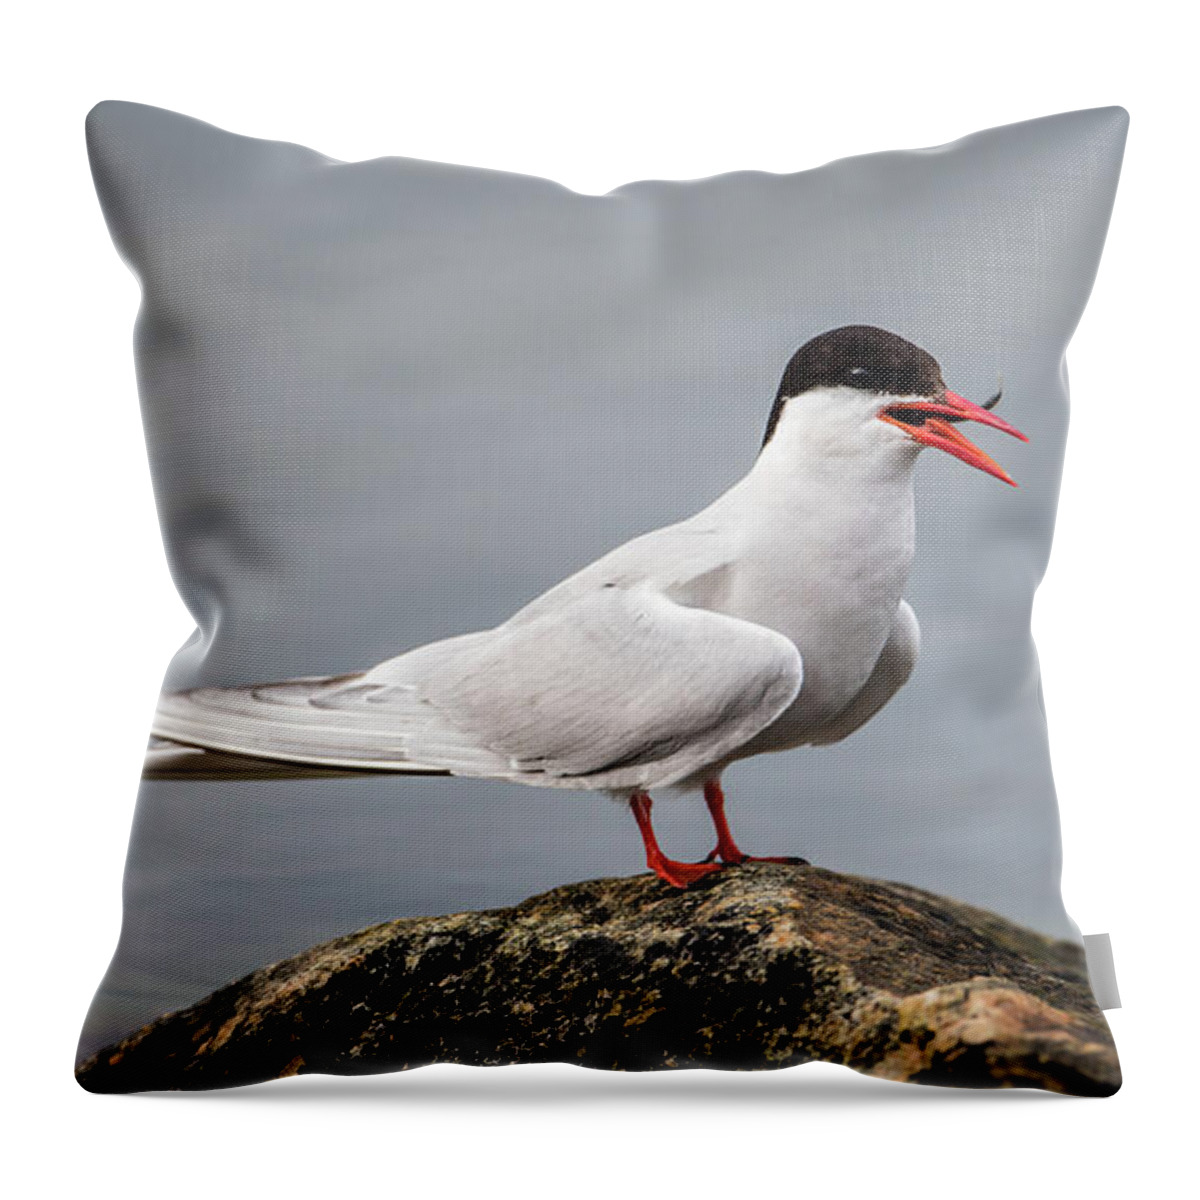 Common Tern Throw Pillow featuring the photograph Common Tern by Torbjorn Swenelius